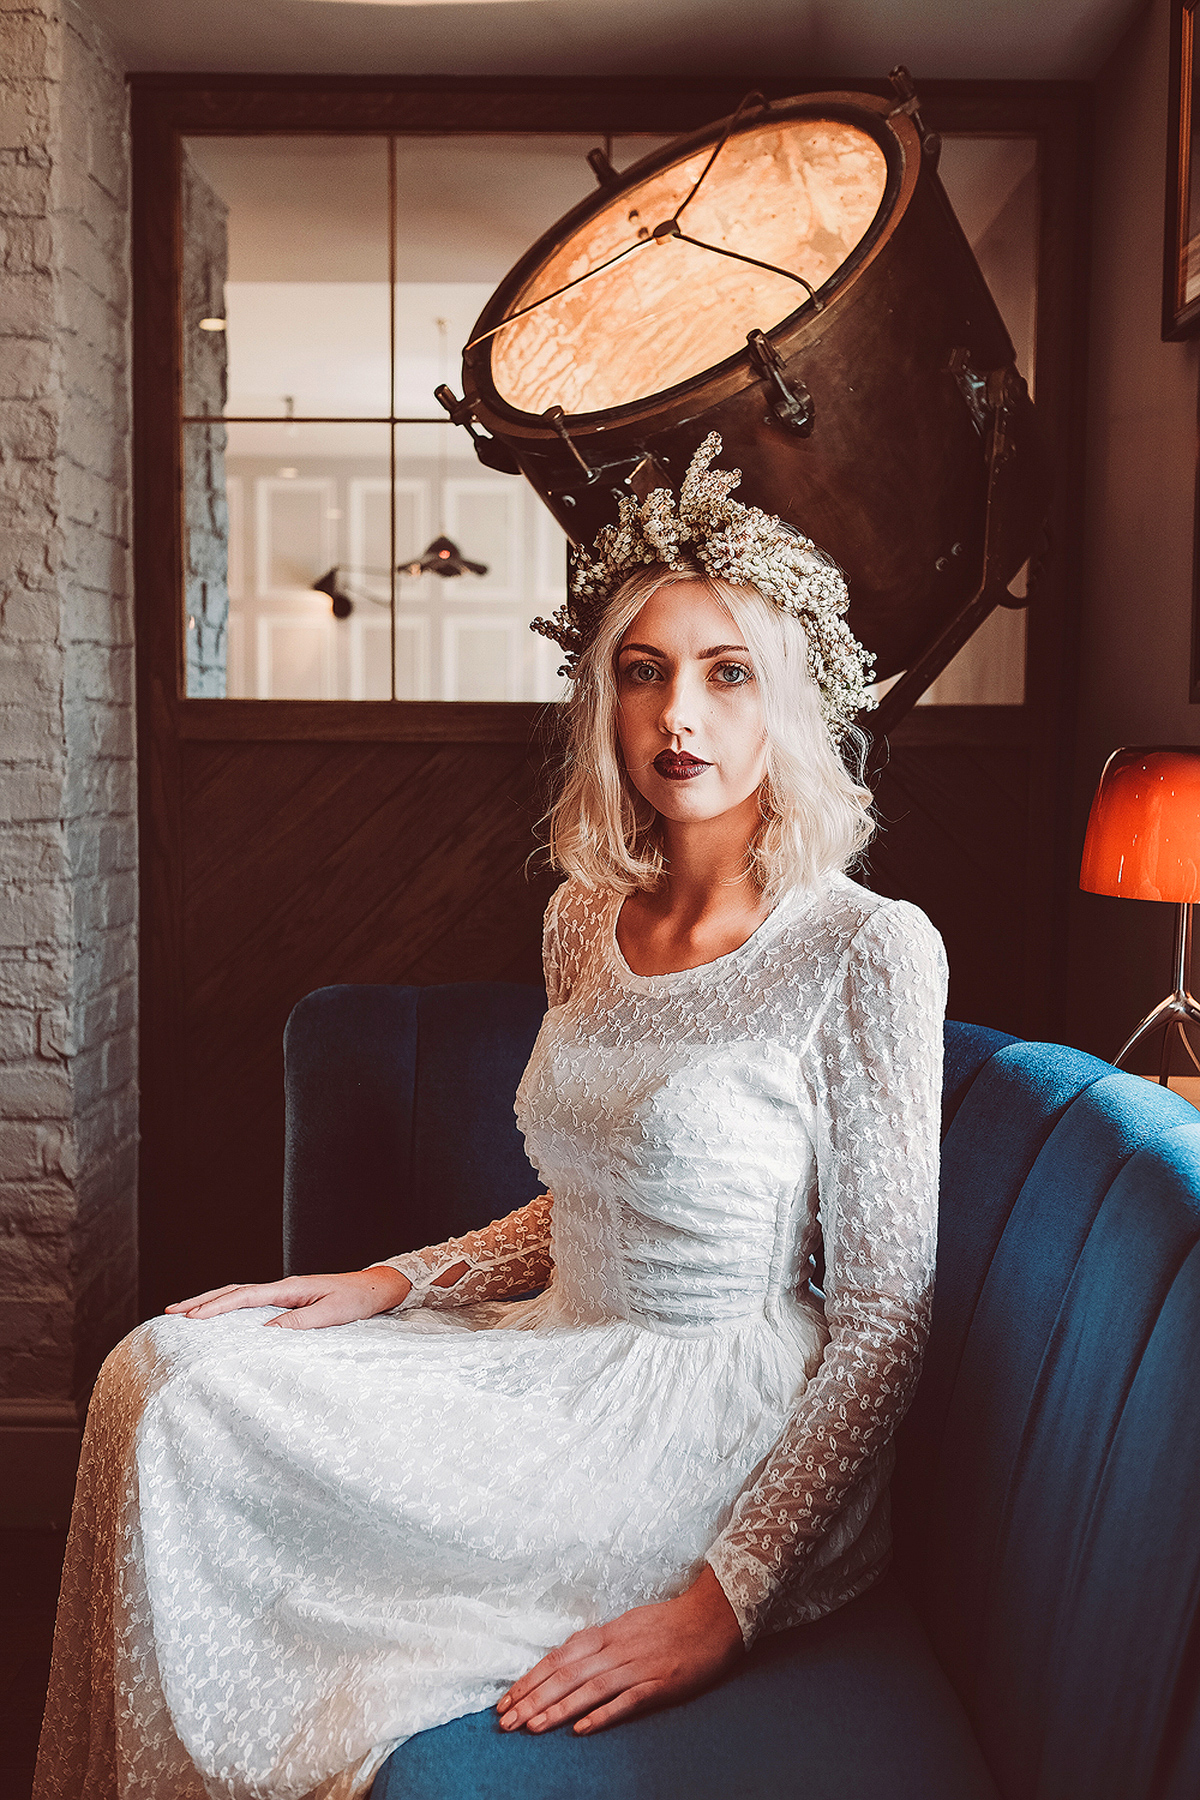 Vintage wedding dresses and bridal fashion from the 1940's, 1950's, 1960's and 1970's, from Story of My Dress. Images by Lemonade Pictures.